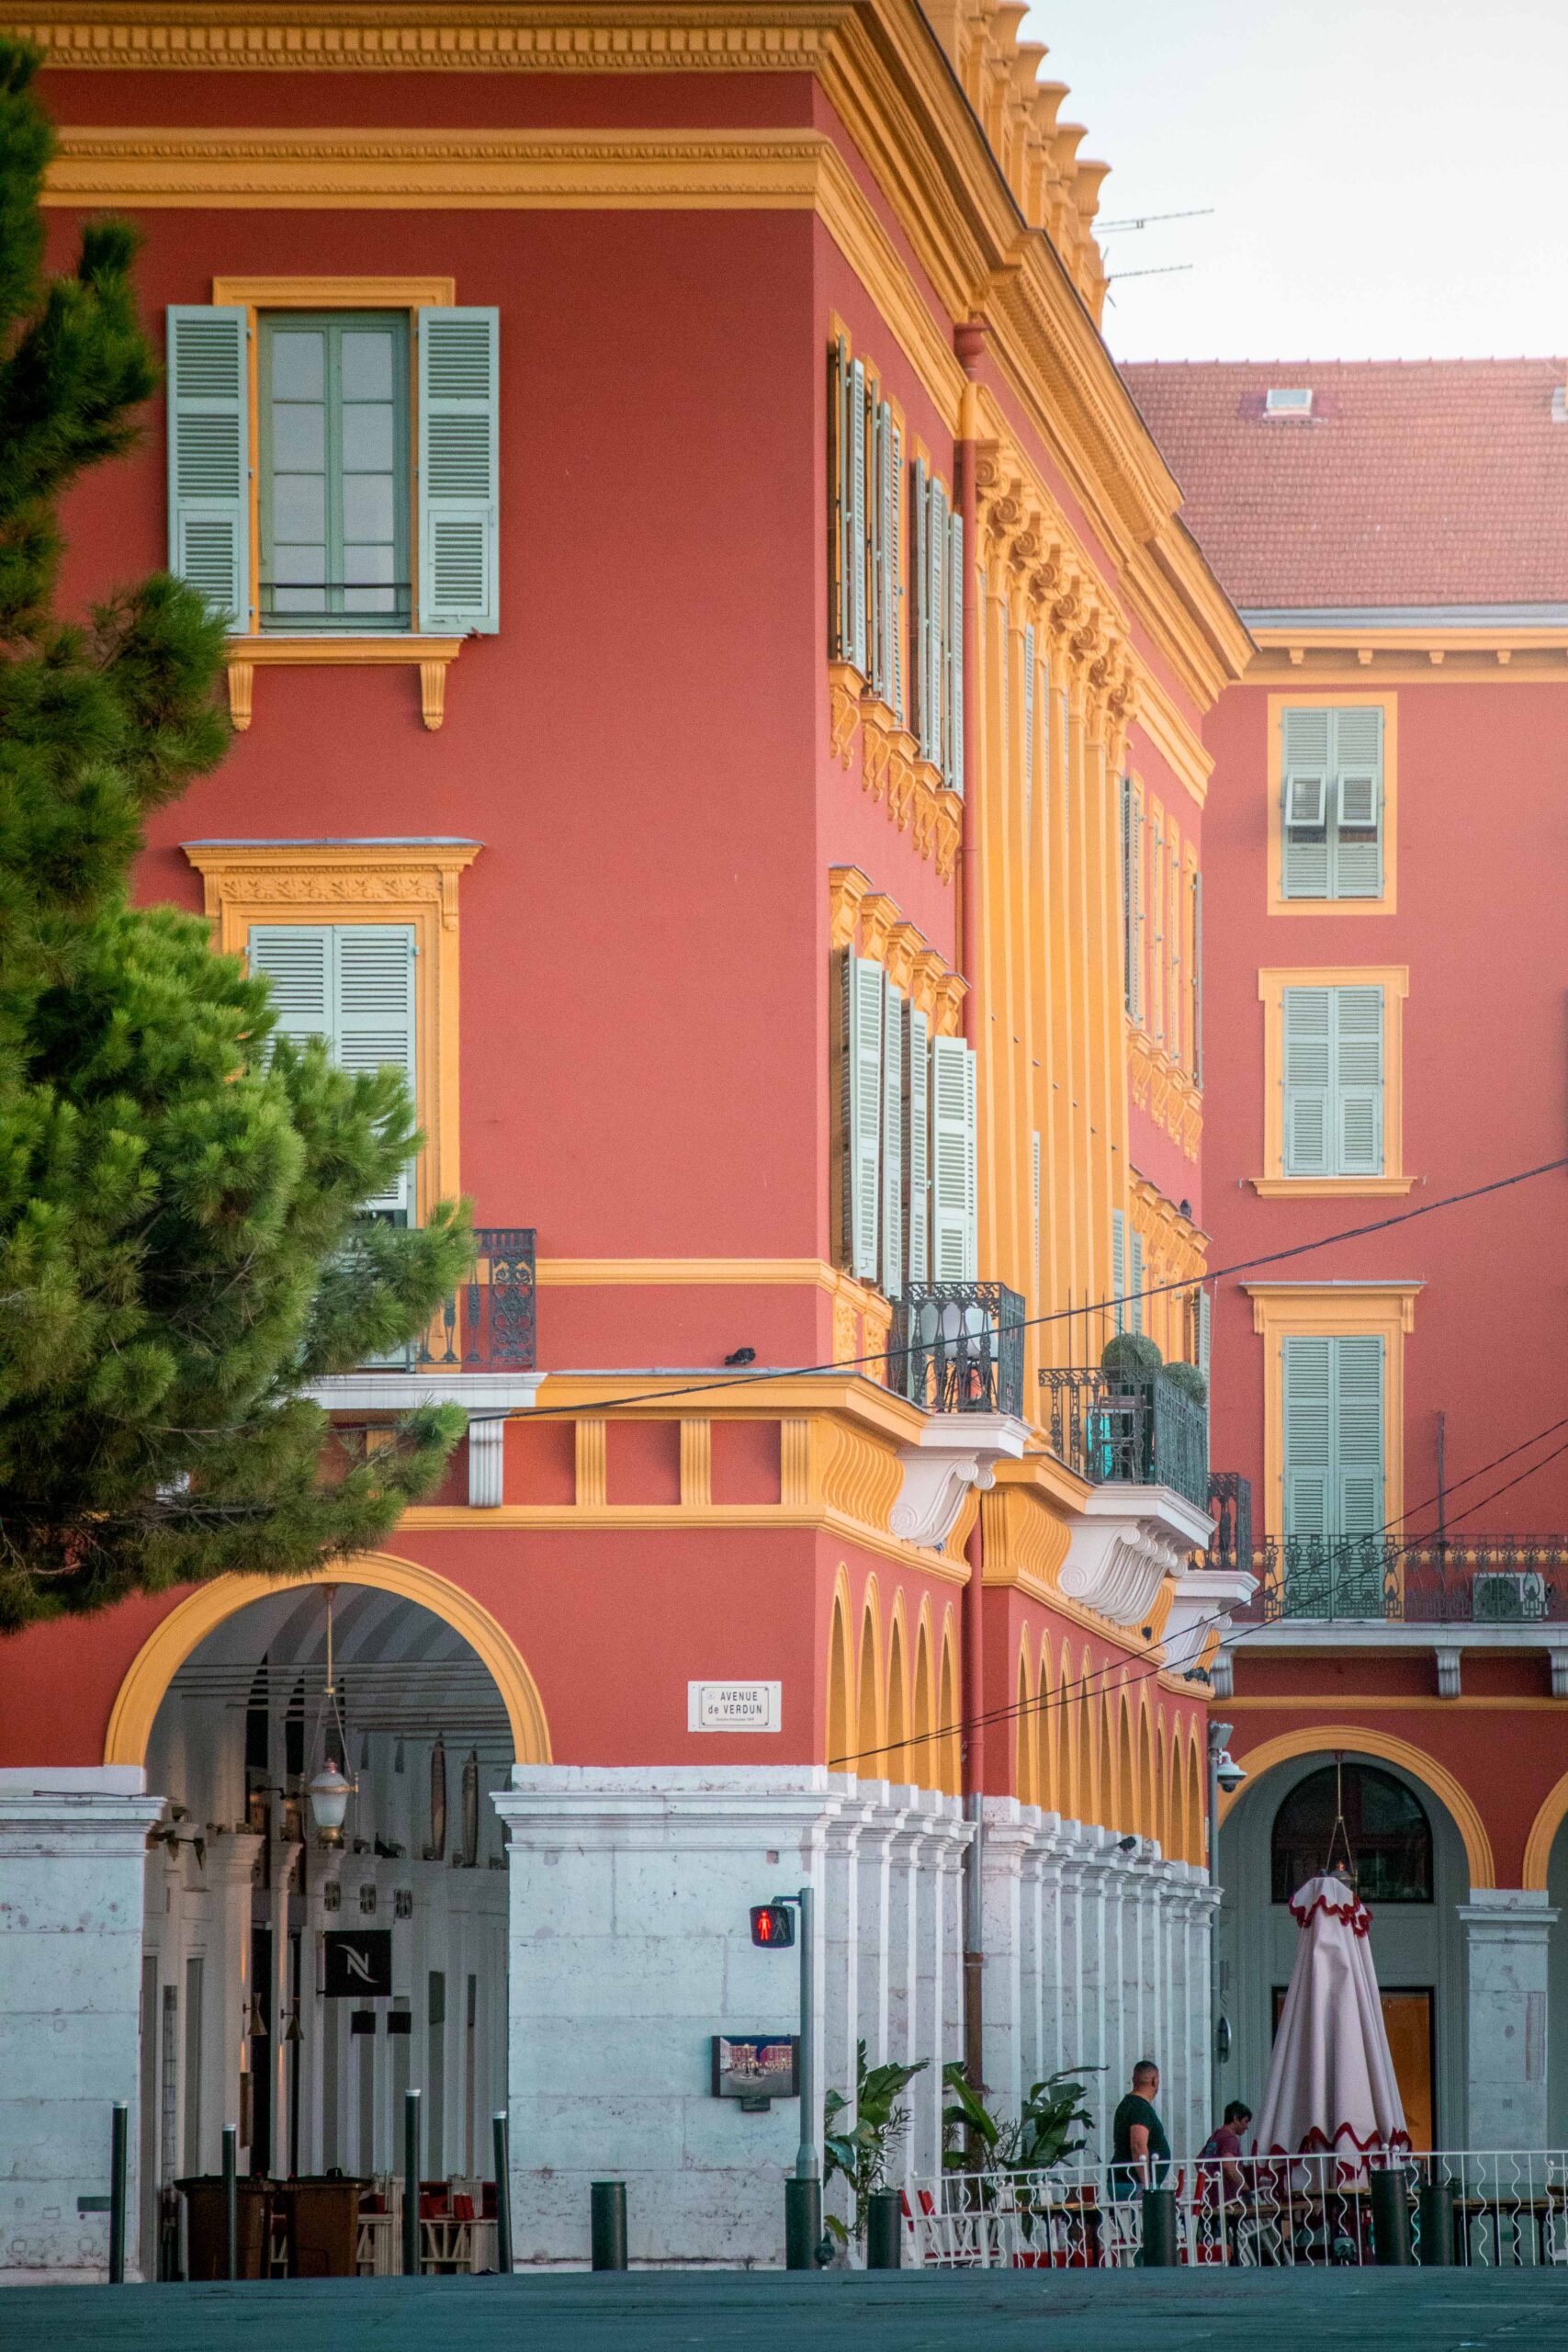 Red and yellow building (windows, balconies, lamps and arches) at the intersection of Avenue de Verdun and Place Masséna in Nice, France